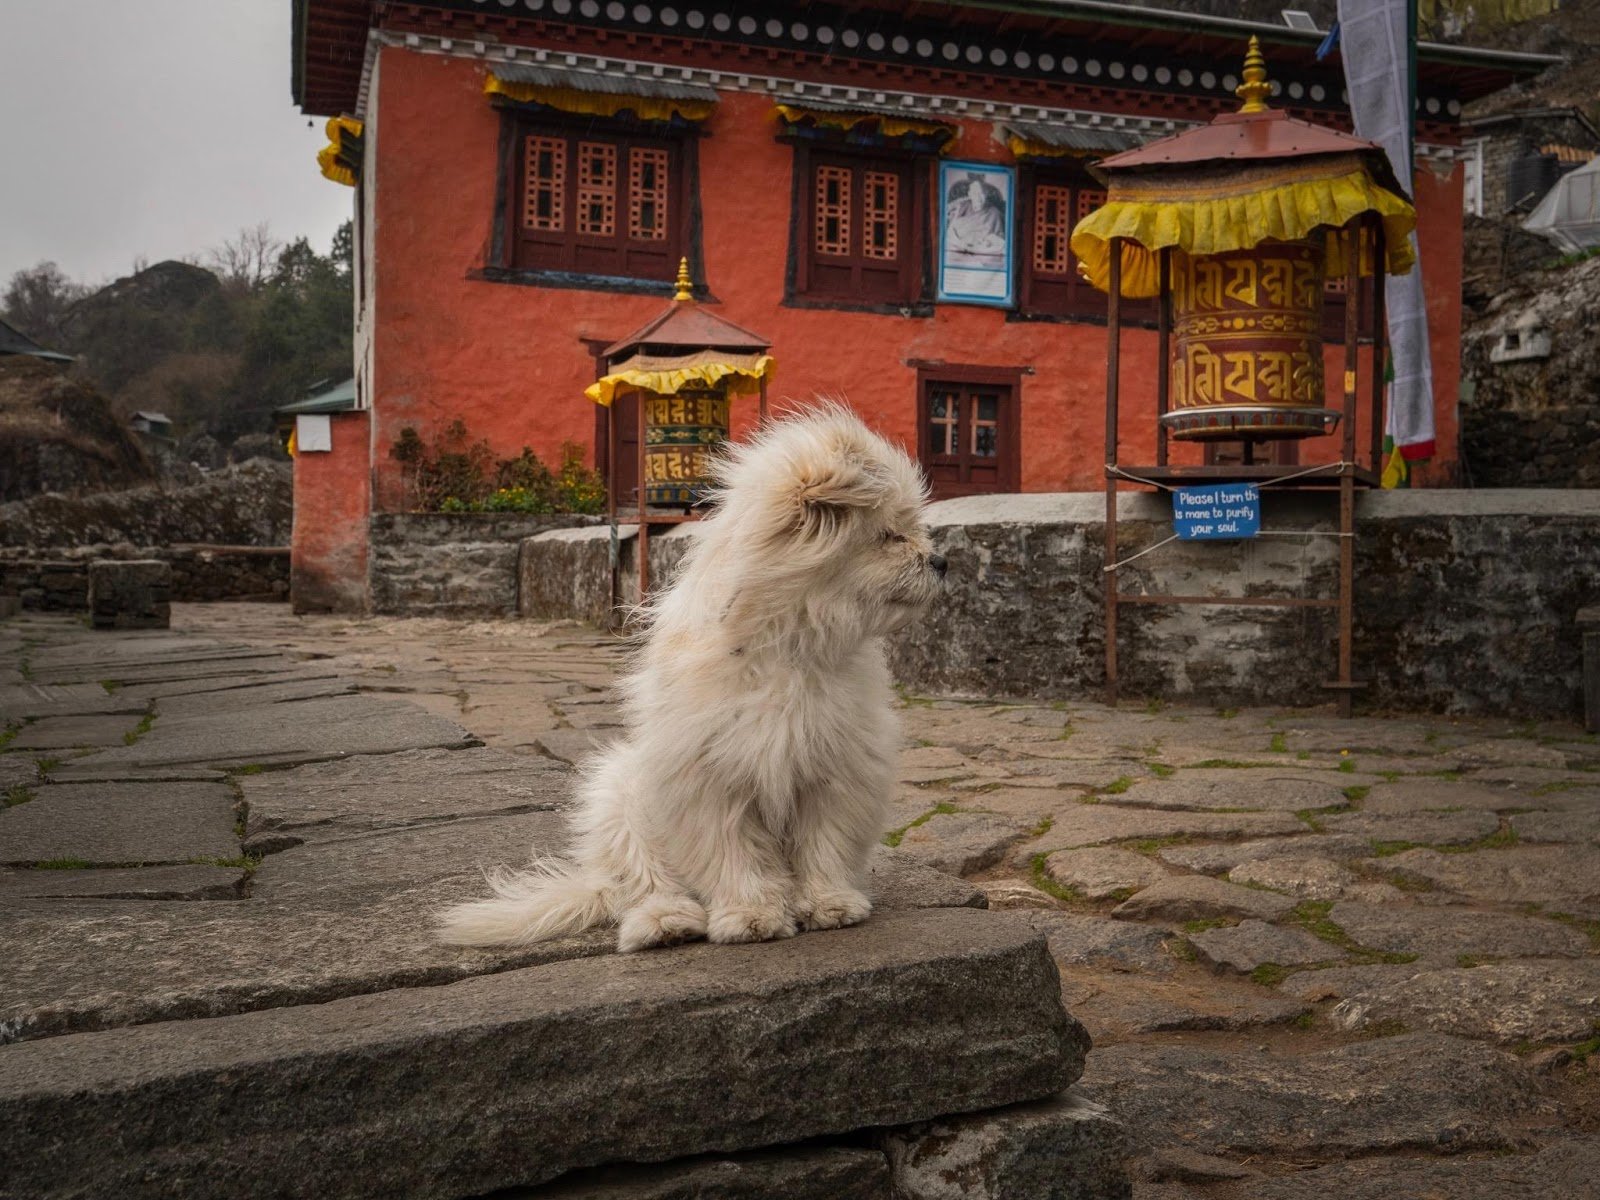 A dog sits in front of a prayer mane to purify the soul in Nepal's Himalaya region